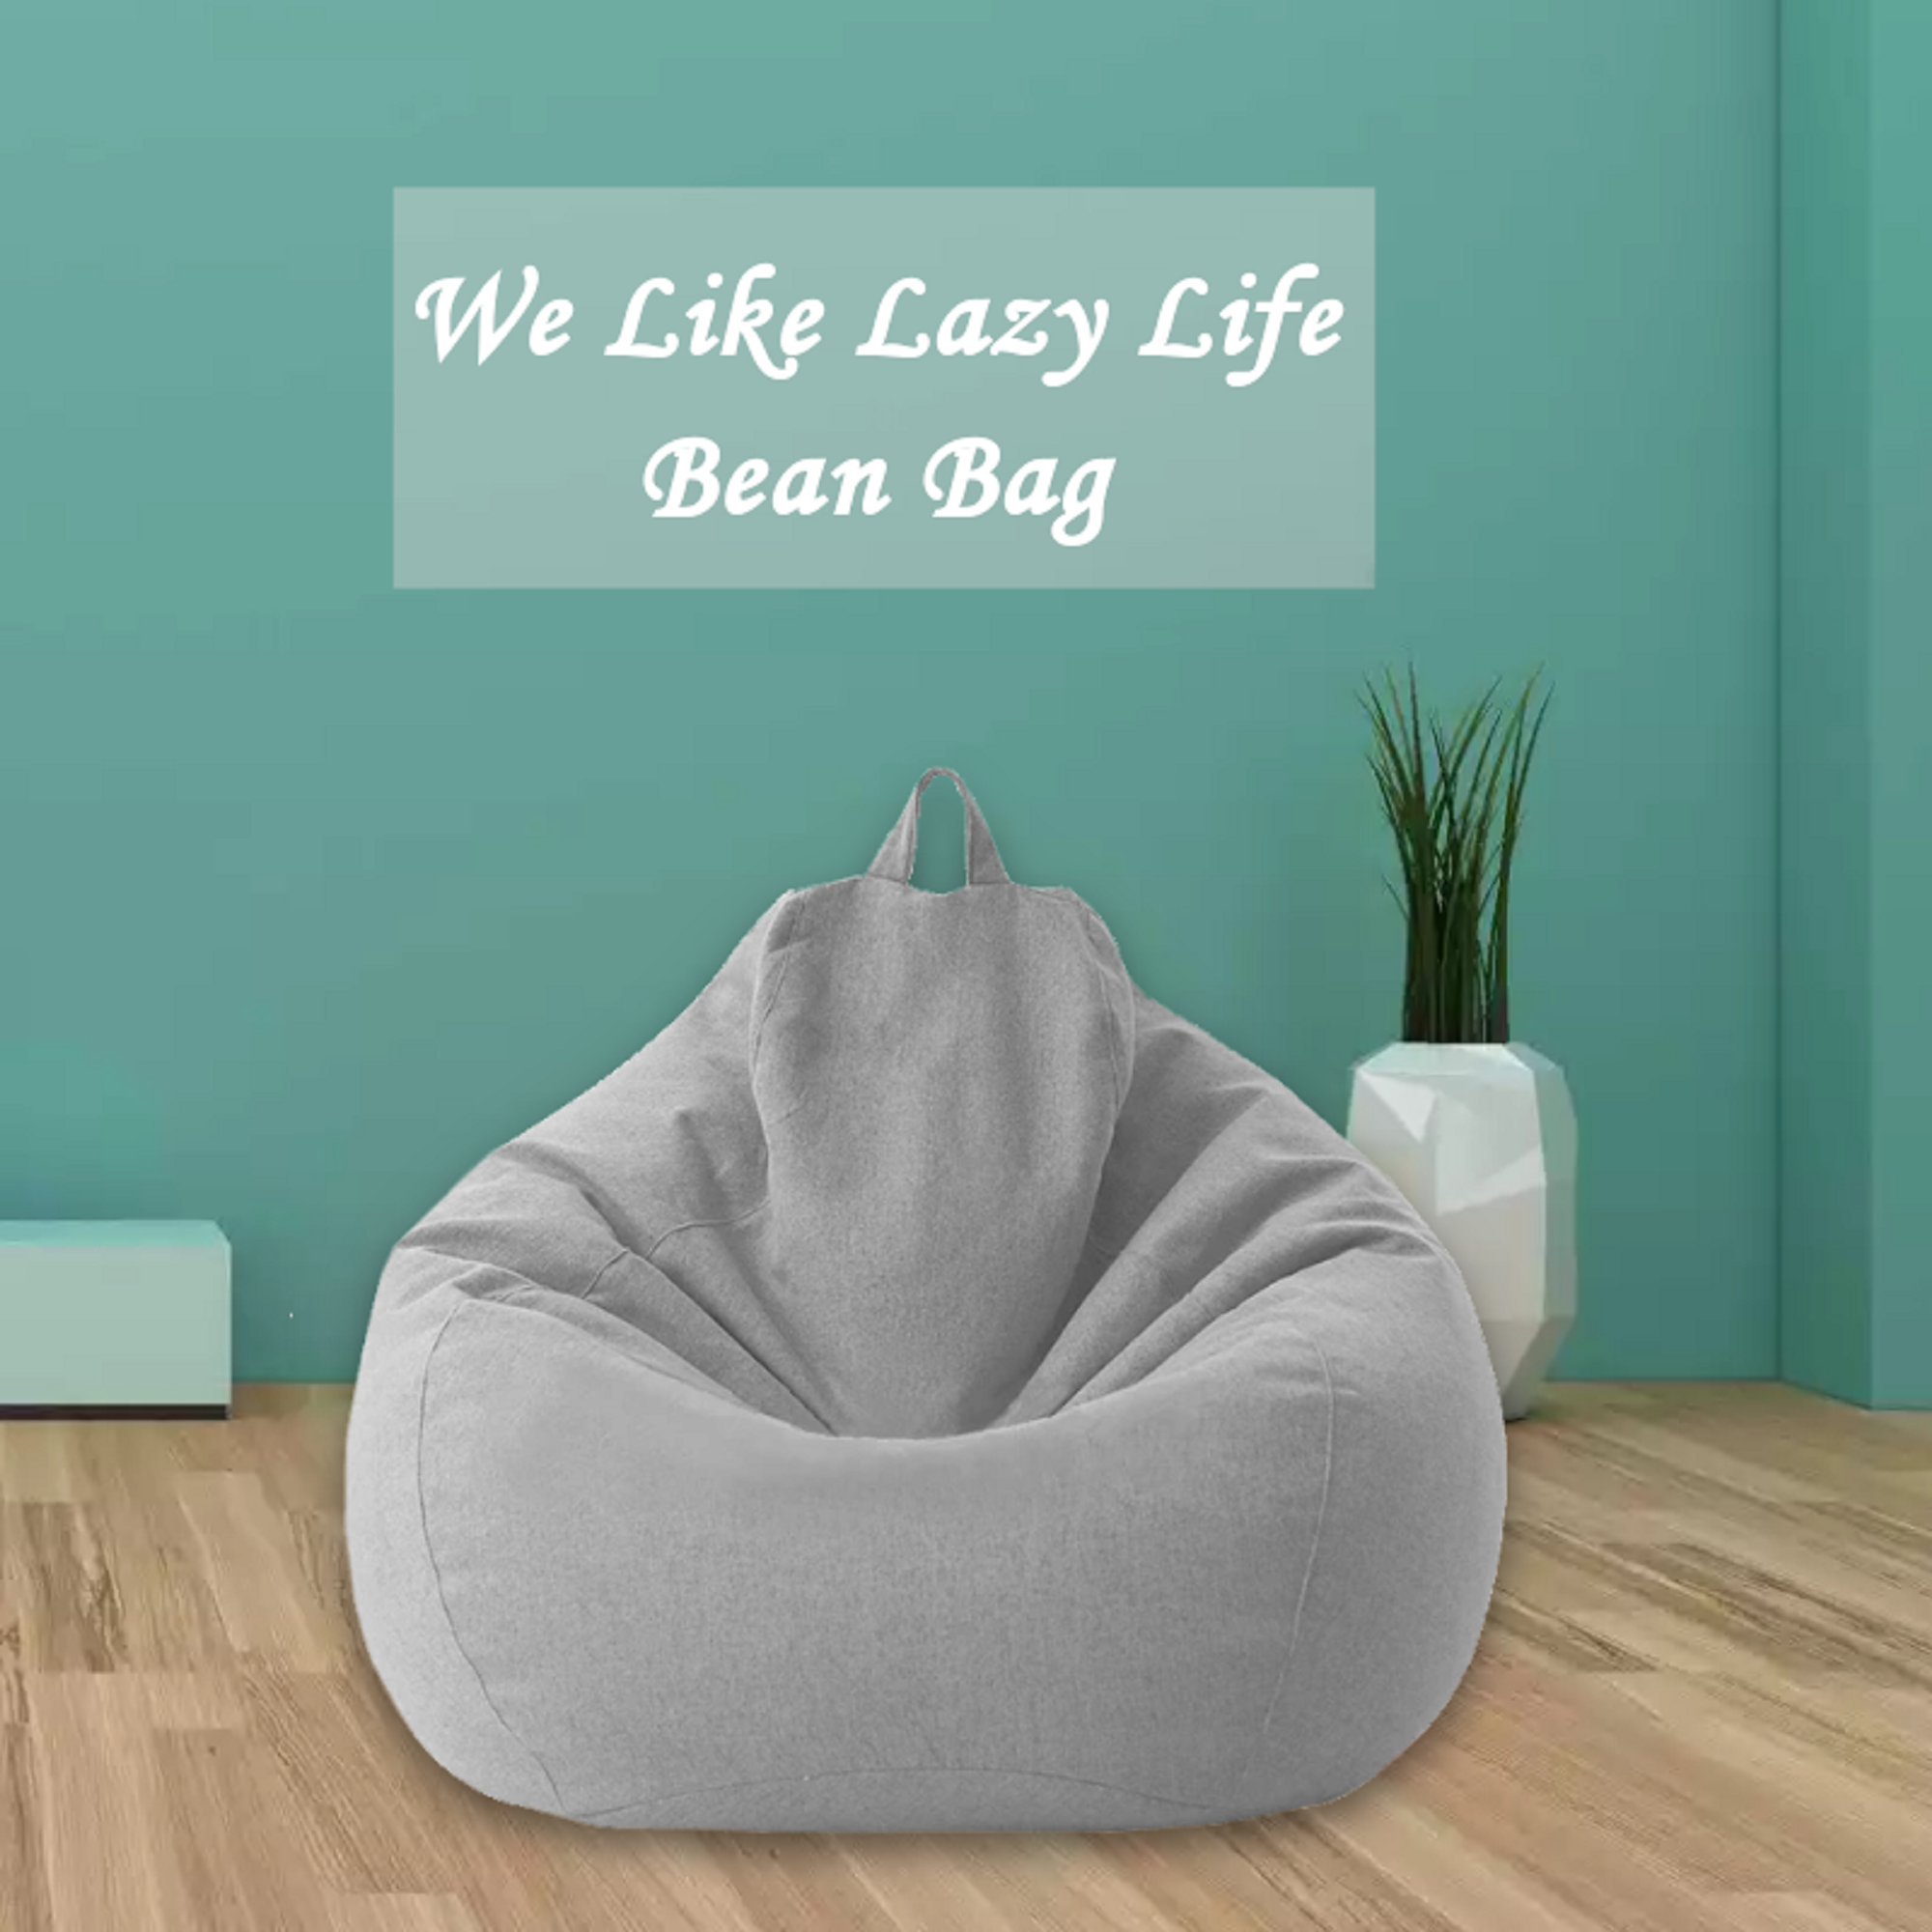 Eyicmarn 1pc Classic Sofa Chairs Lazy Lounger Bean Bag Storage Chair for Home Garden Lounge Living Room - image 4 of 5